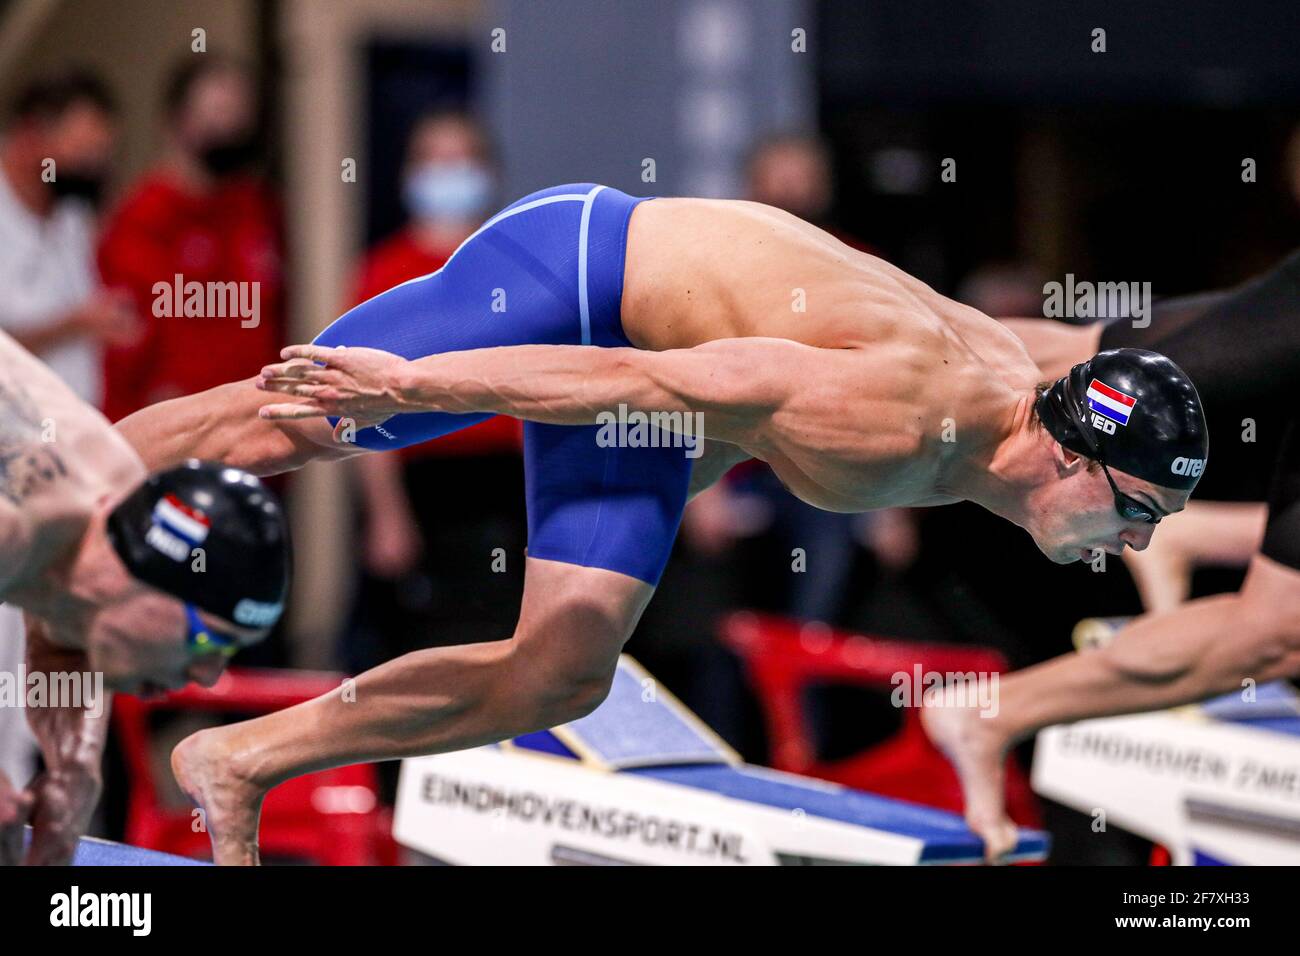 EINDHOVEN, NETHERLANDS - APRIL 10: Jesse Puts competing in the Men 100m Freestyle during the Eindhoven Qualification Meet at Pieter van den Hoogenband zwemstadion on April 10, 2021 in Eindhoven, Netherlands  (Photo by Marcel ter Bals/Orange Pictures)*** Local Caption *** Jesse Puts Stock Photo